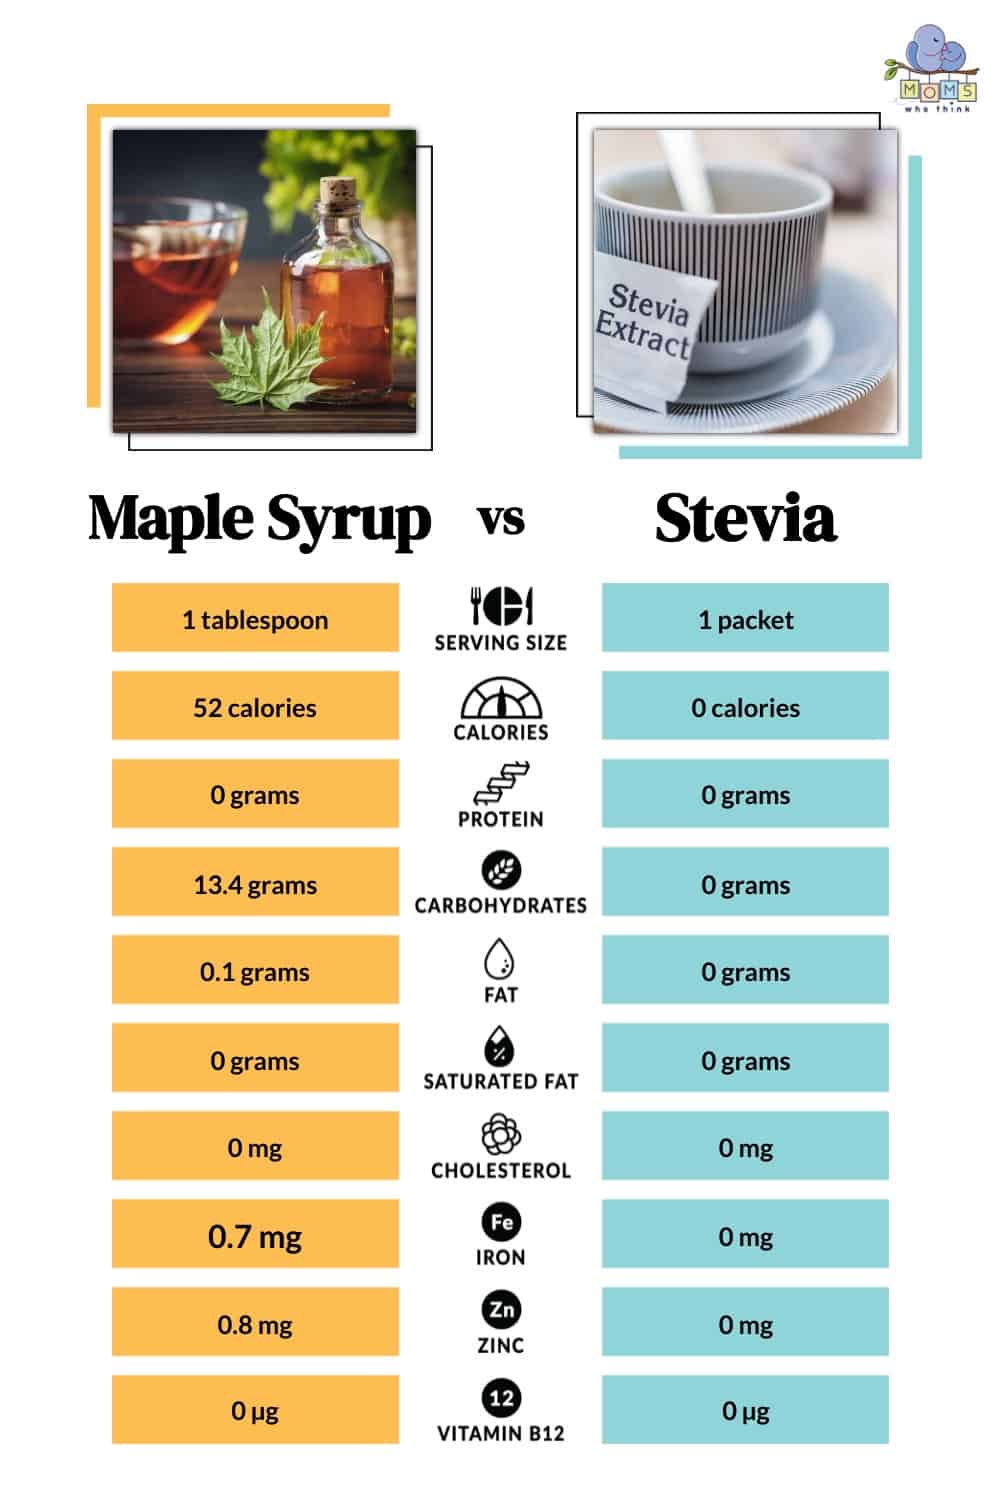 Maple Syrup vs Stevia Nutritional Facts